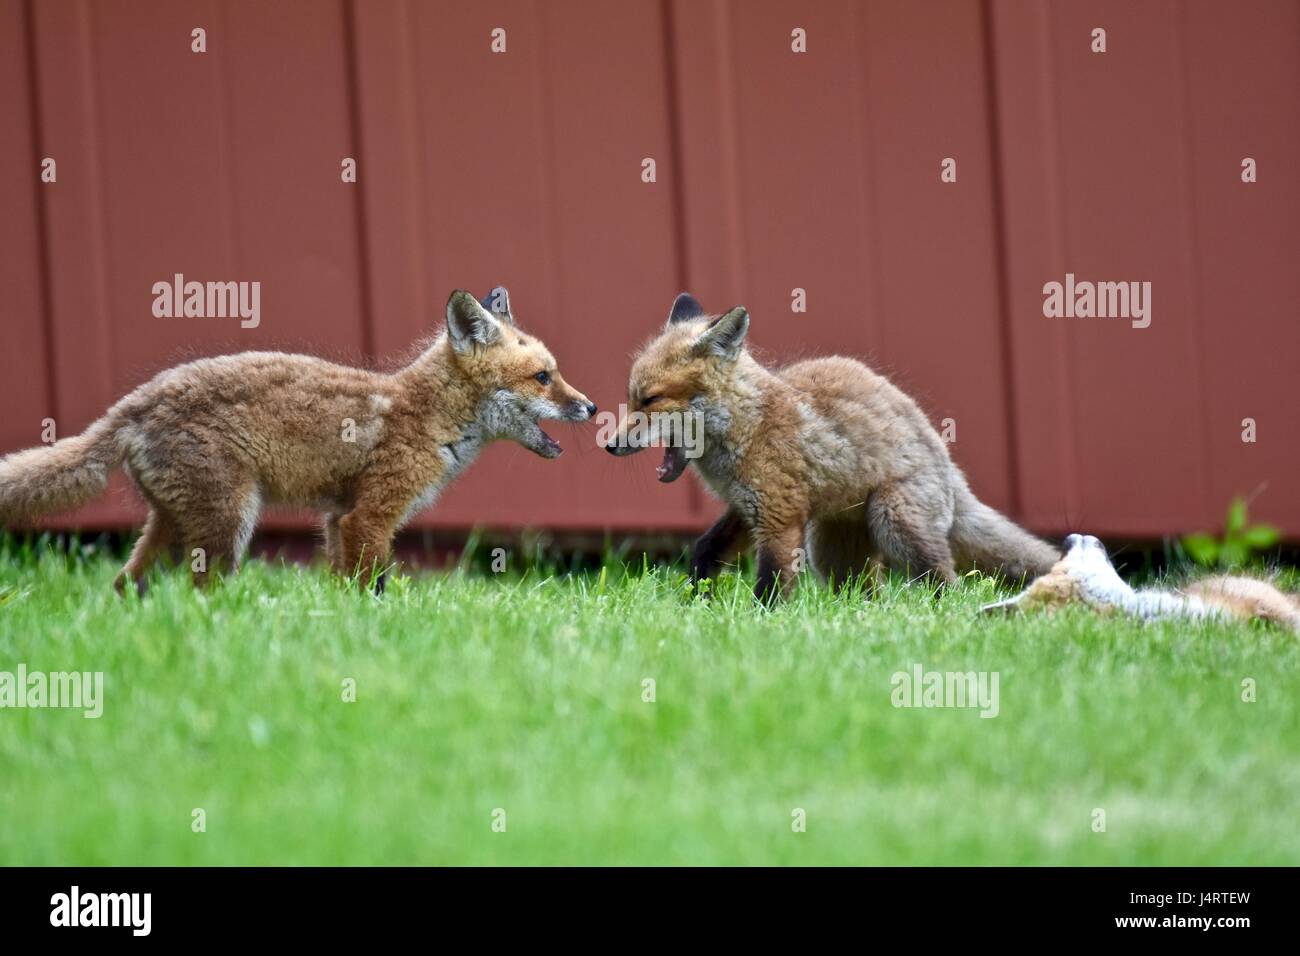 Red fox (Vulpes vulpes) kits, babies, or pups play fighting in a grass field next to an old barn Stock Photo